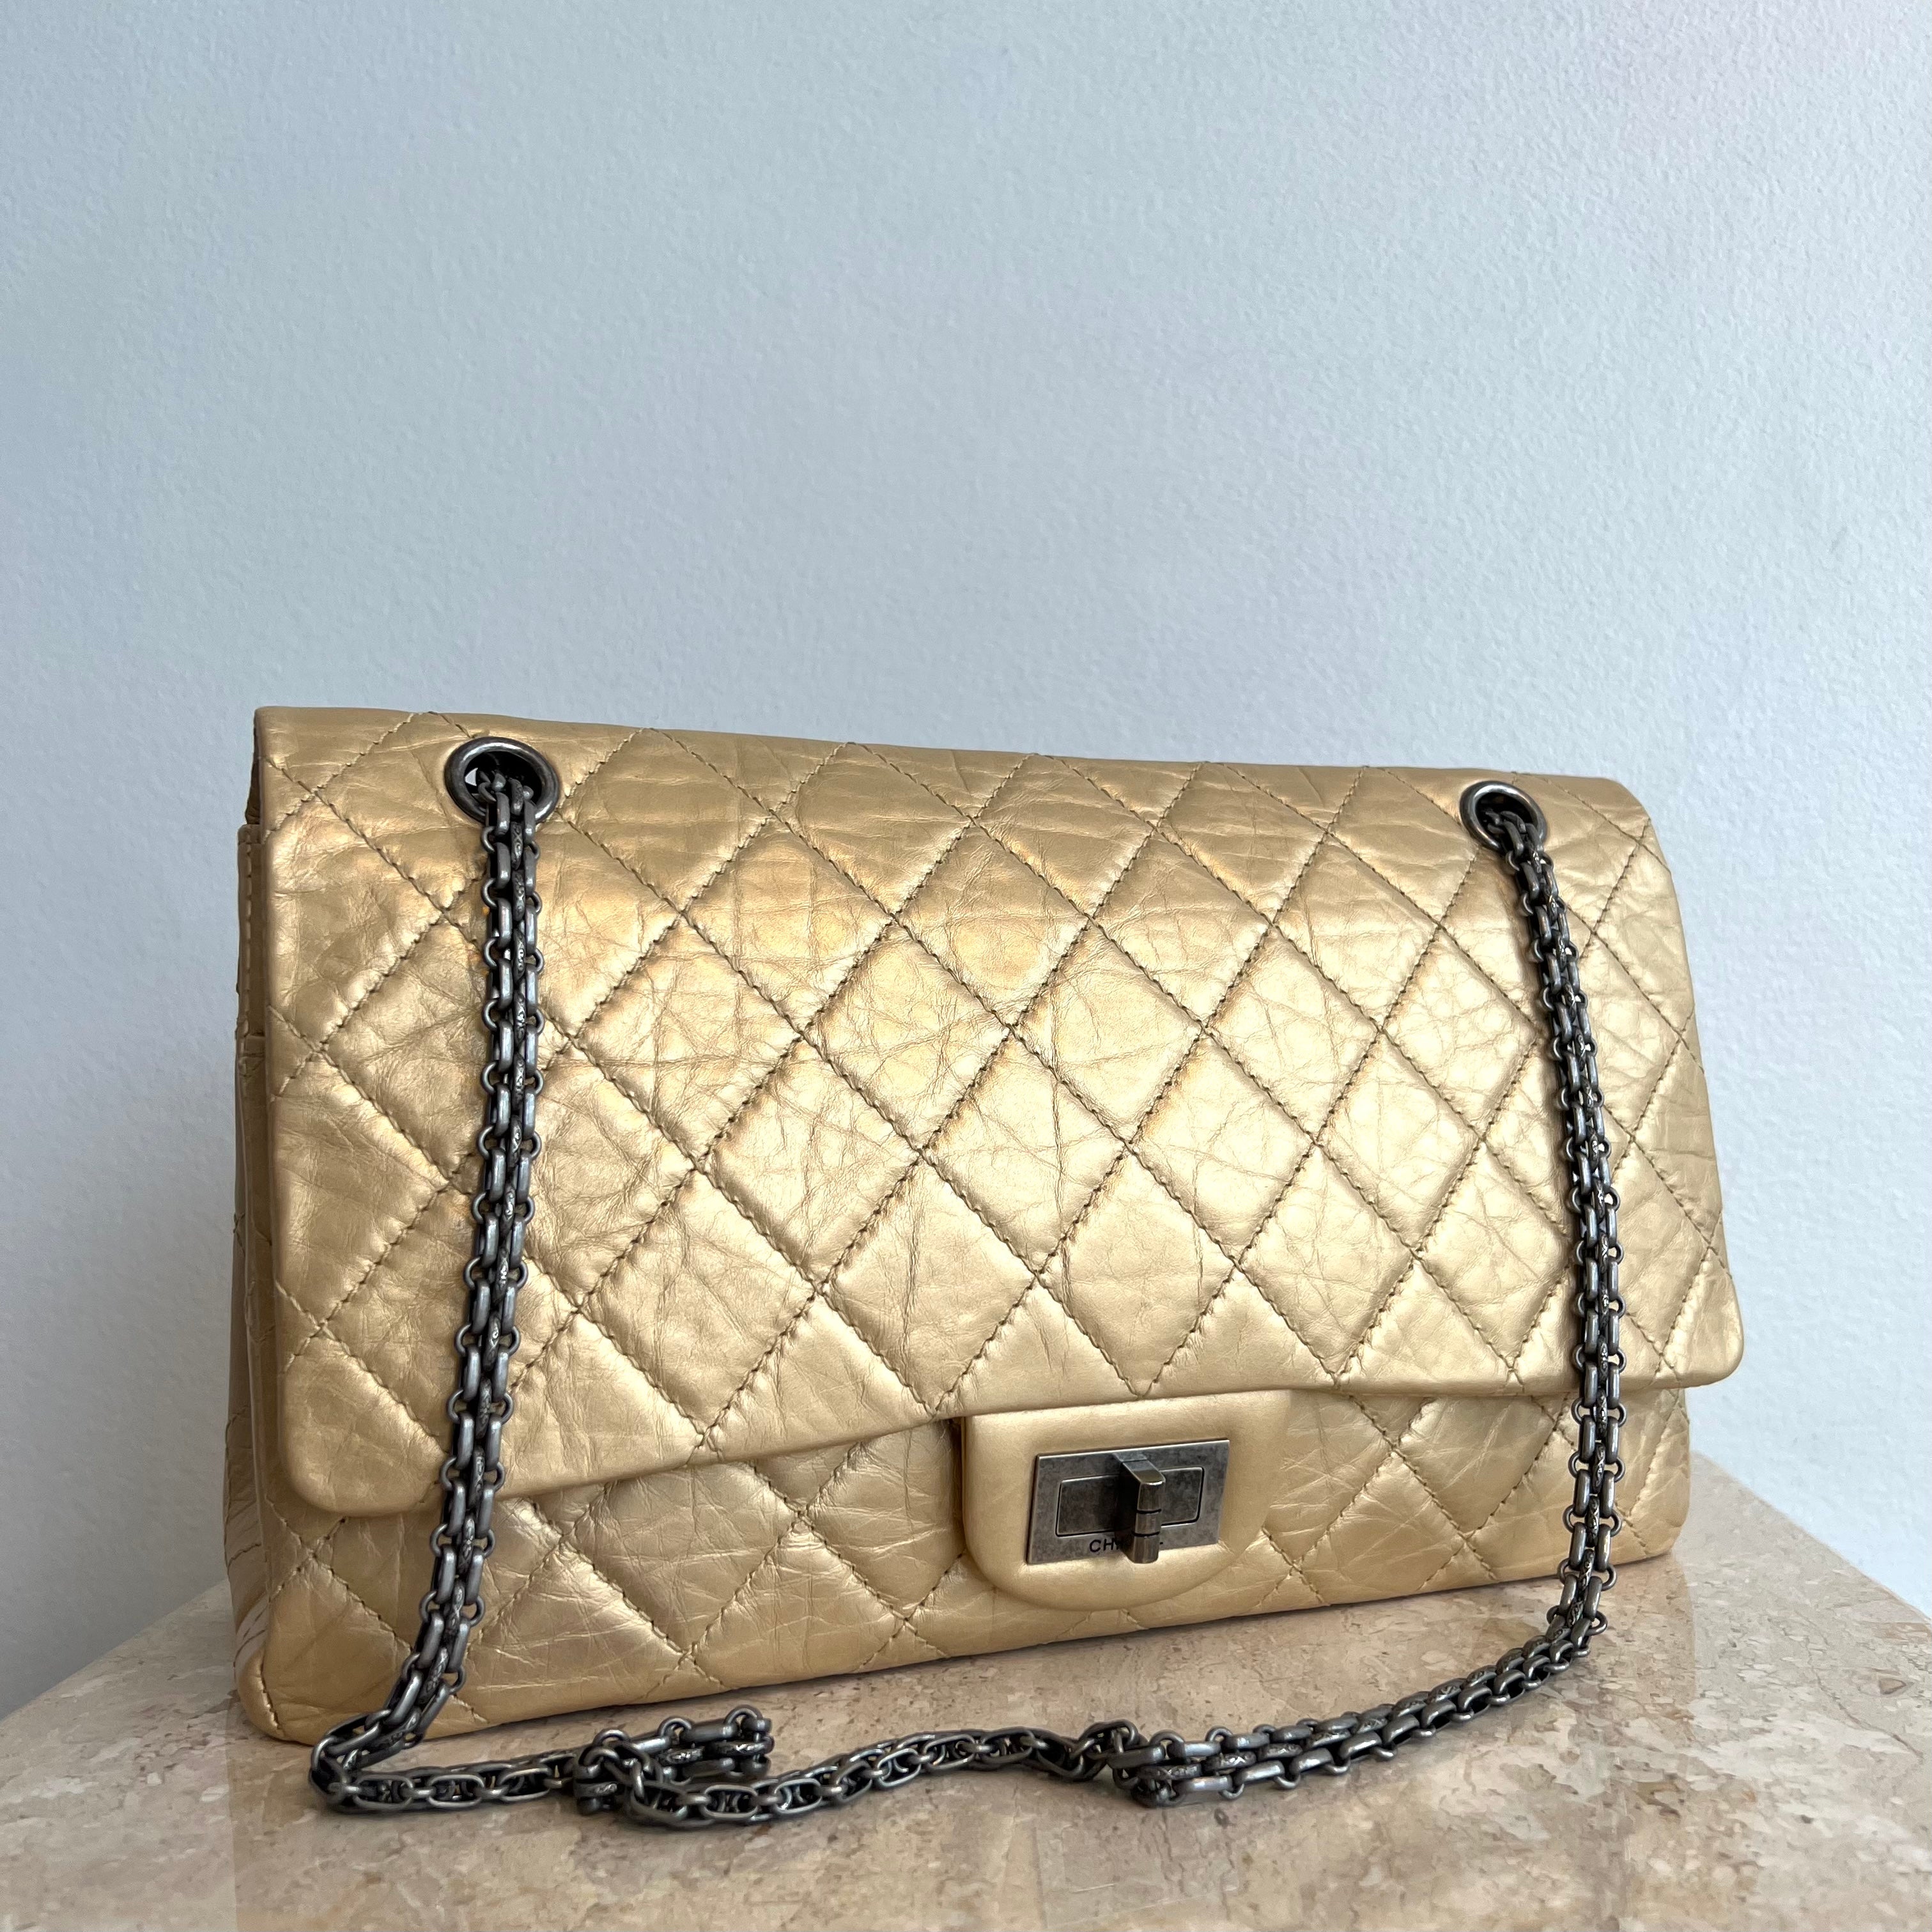 Pre-Owned CHANEL Gold Aged Calfskin Leather Reissue 226 Double Flap